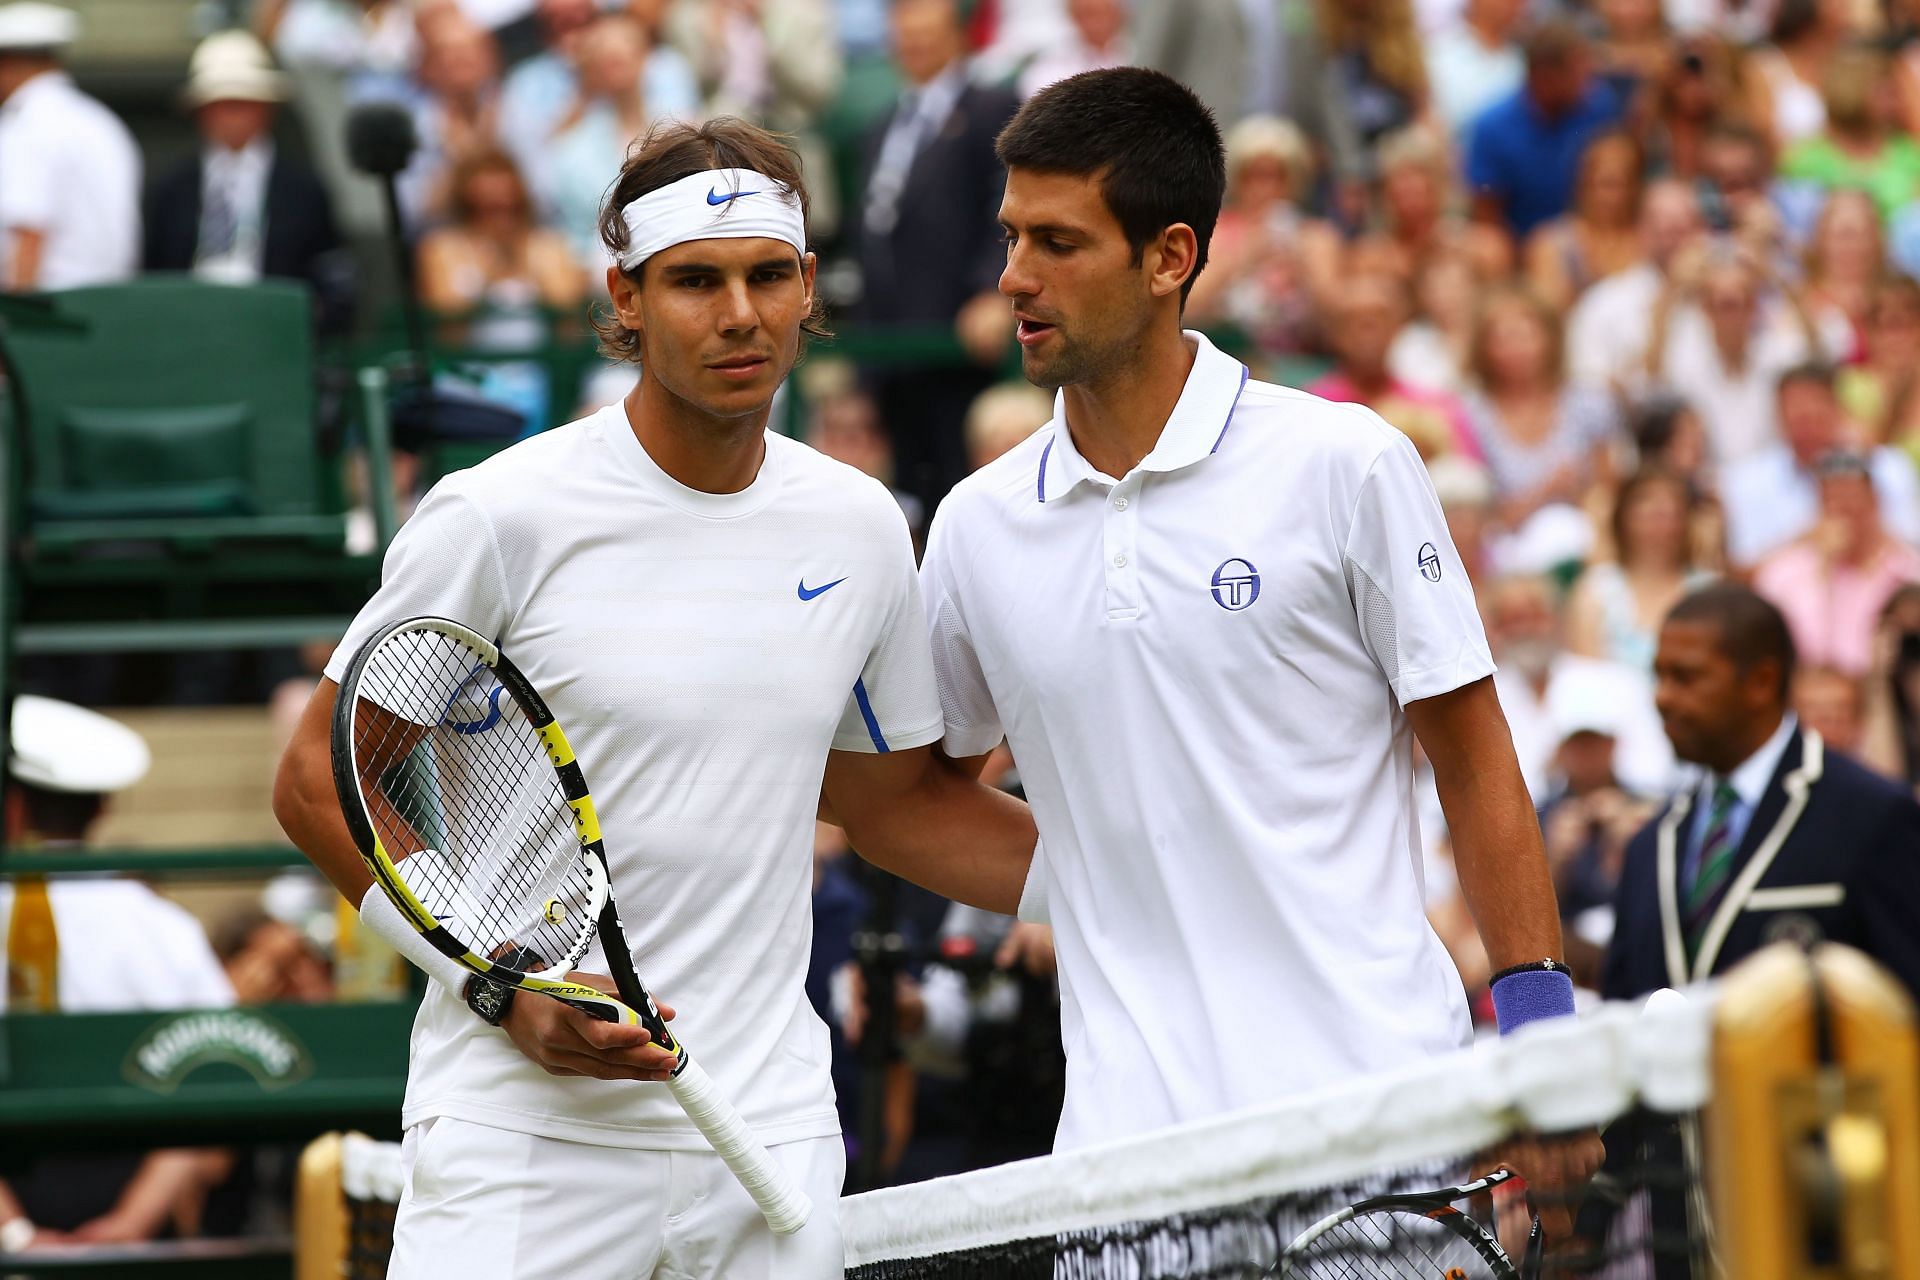 Rafael Nadal and Novak Djokovic both lead the head-to-head against the SF opponents